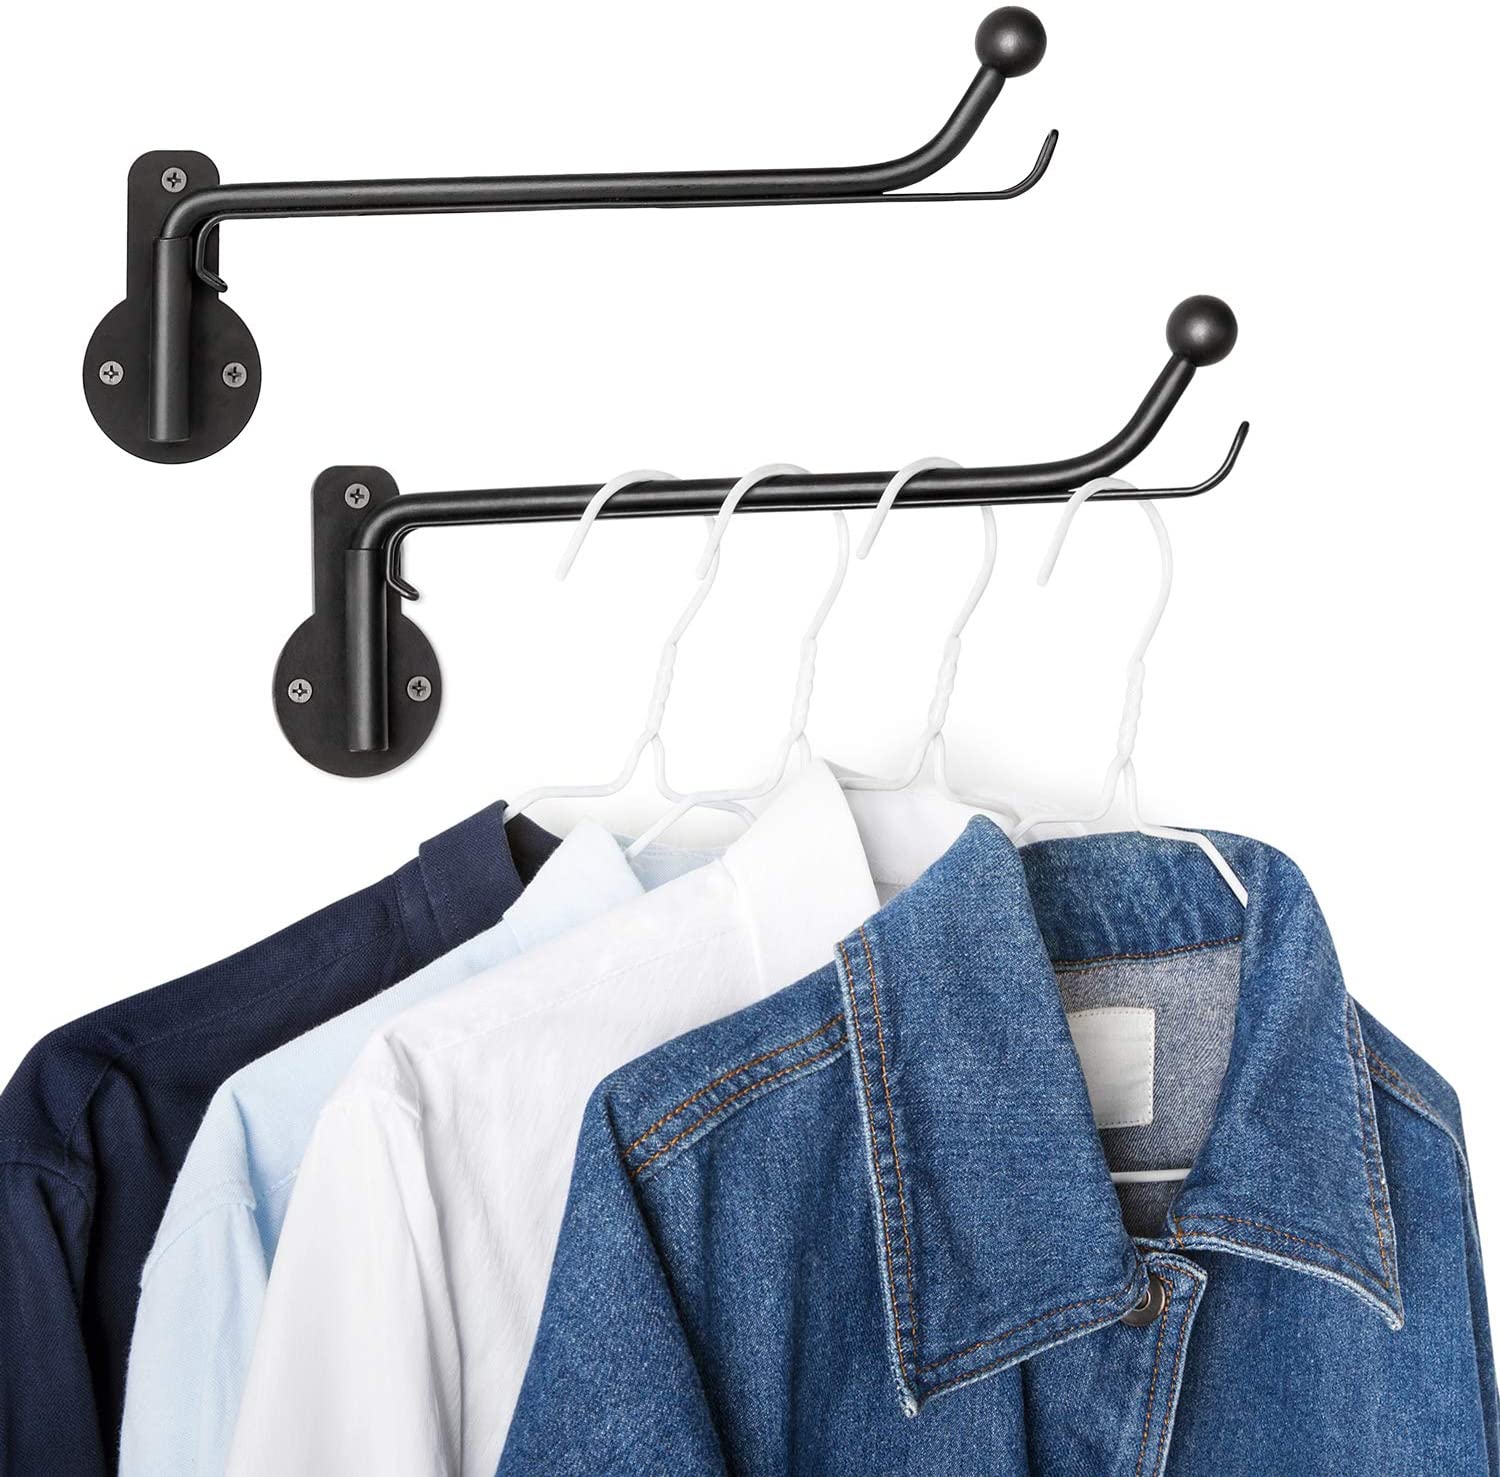  Clothes Hanger with Swing Arm Holder